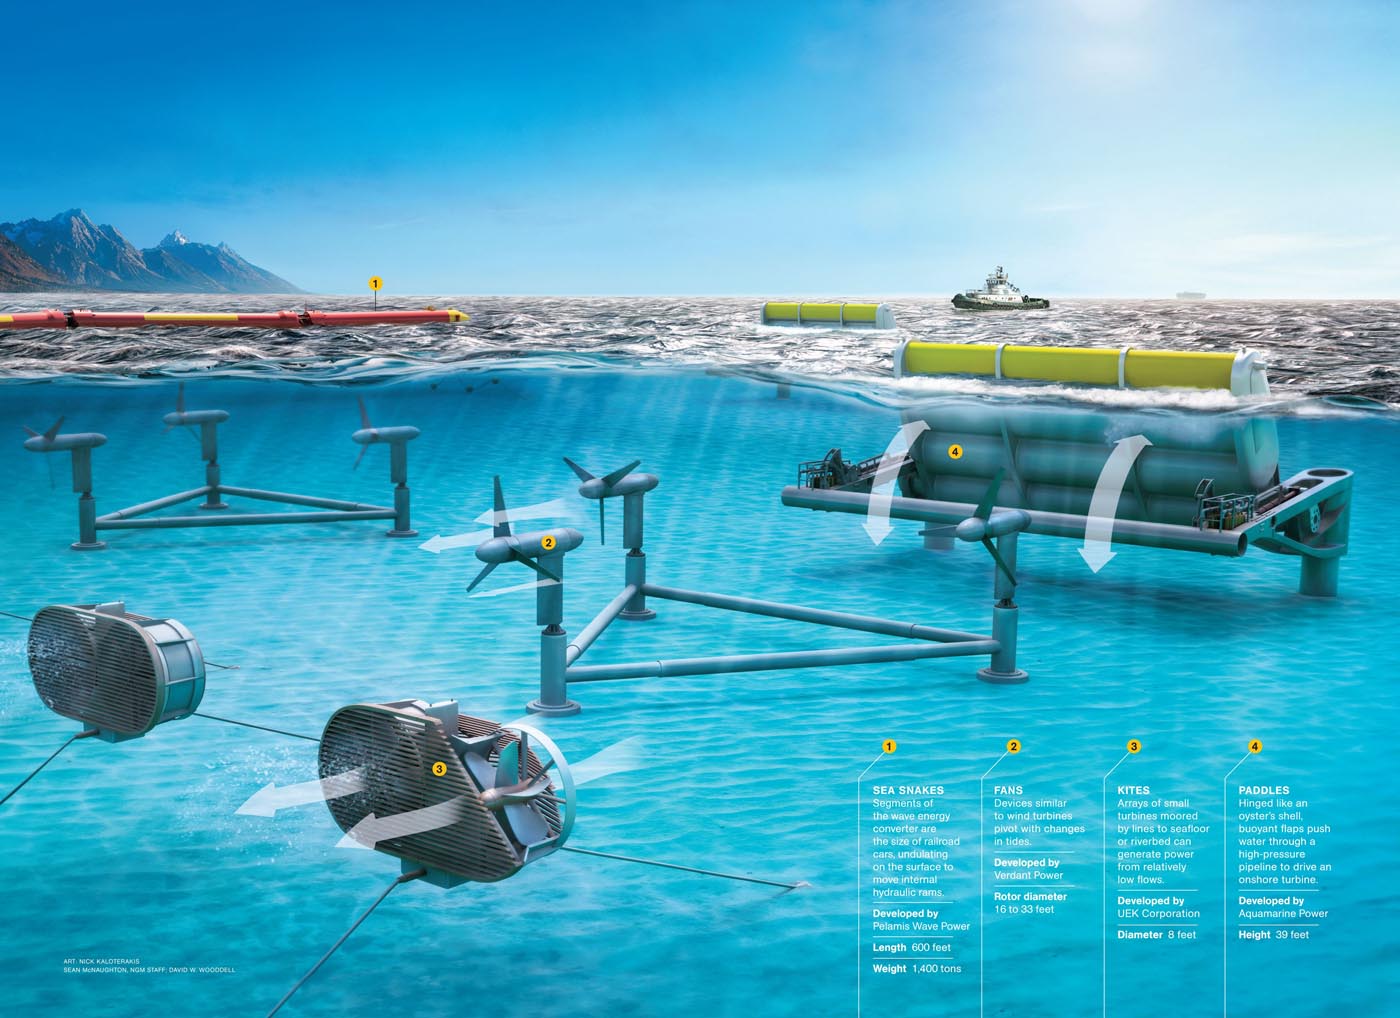 Where is tidal energy currently being used? - Quora